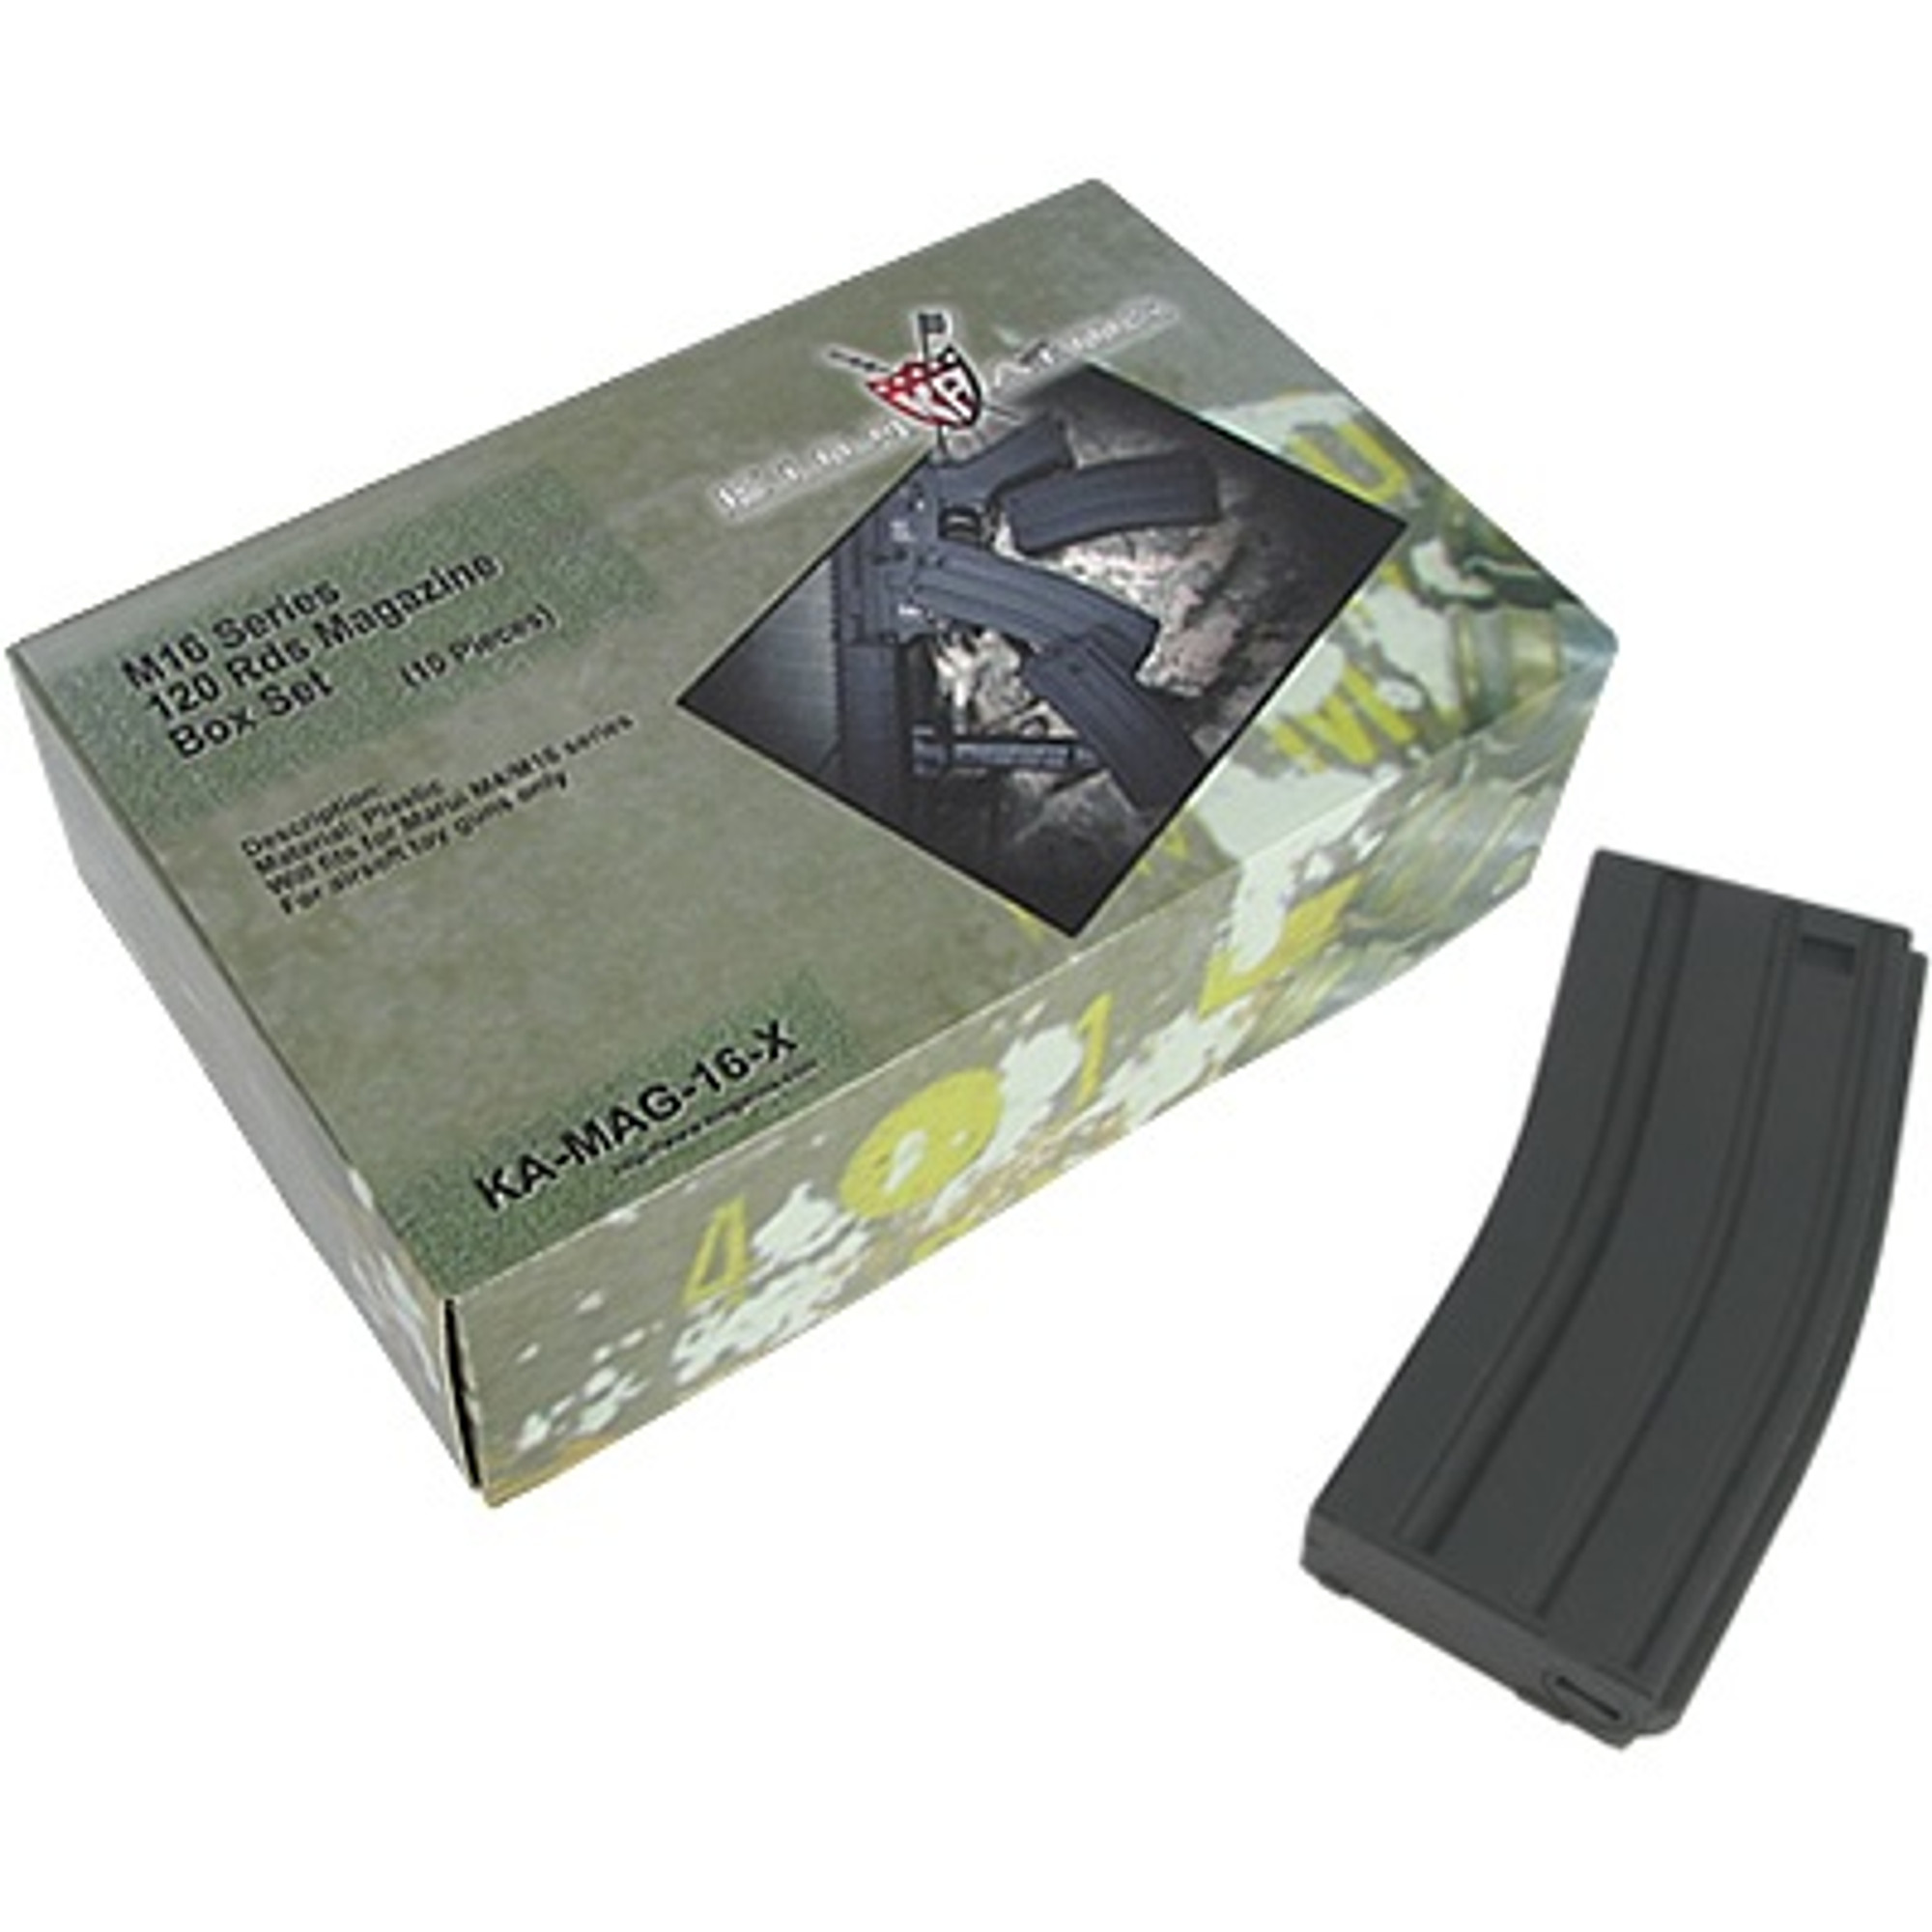 King Arms M16 120rds Magazine 10 Pack - Black